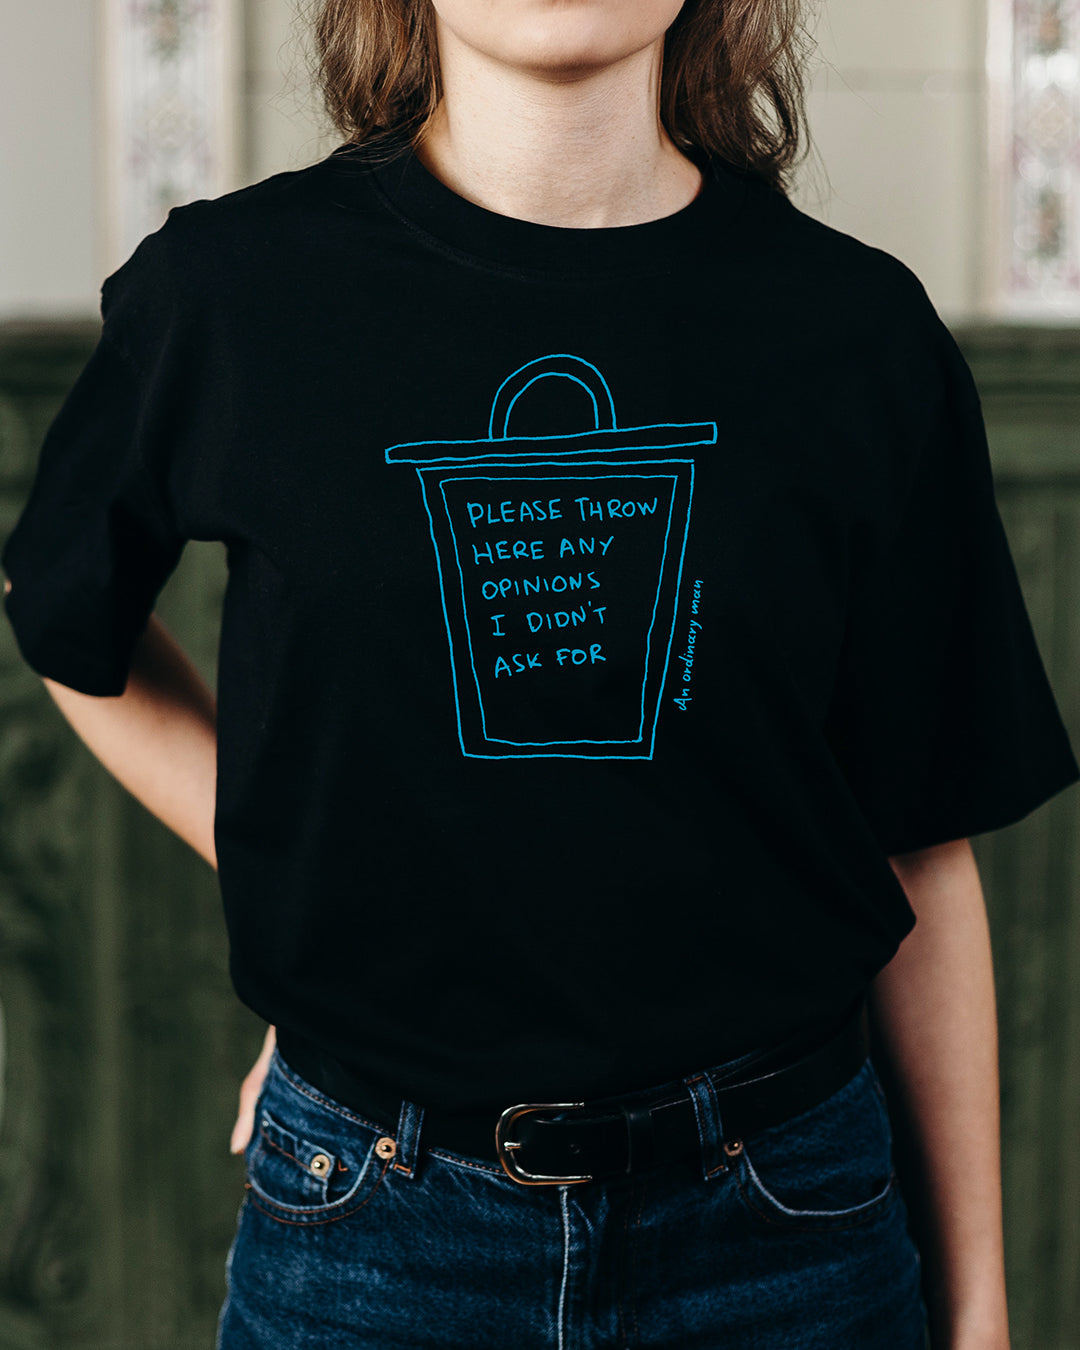 Unisex T-Shirt - Please Throw Here Any Opinions I Didn't Ask For